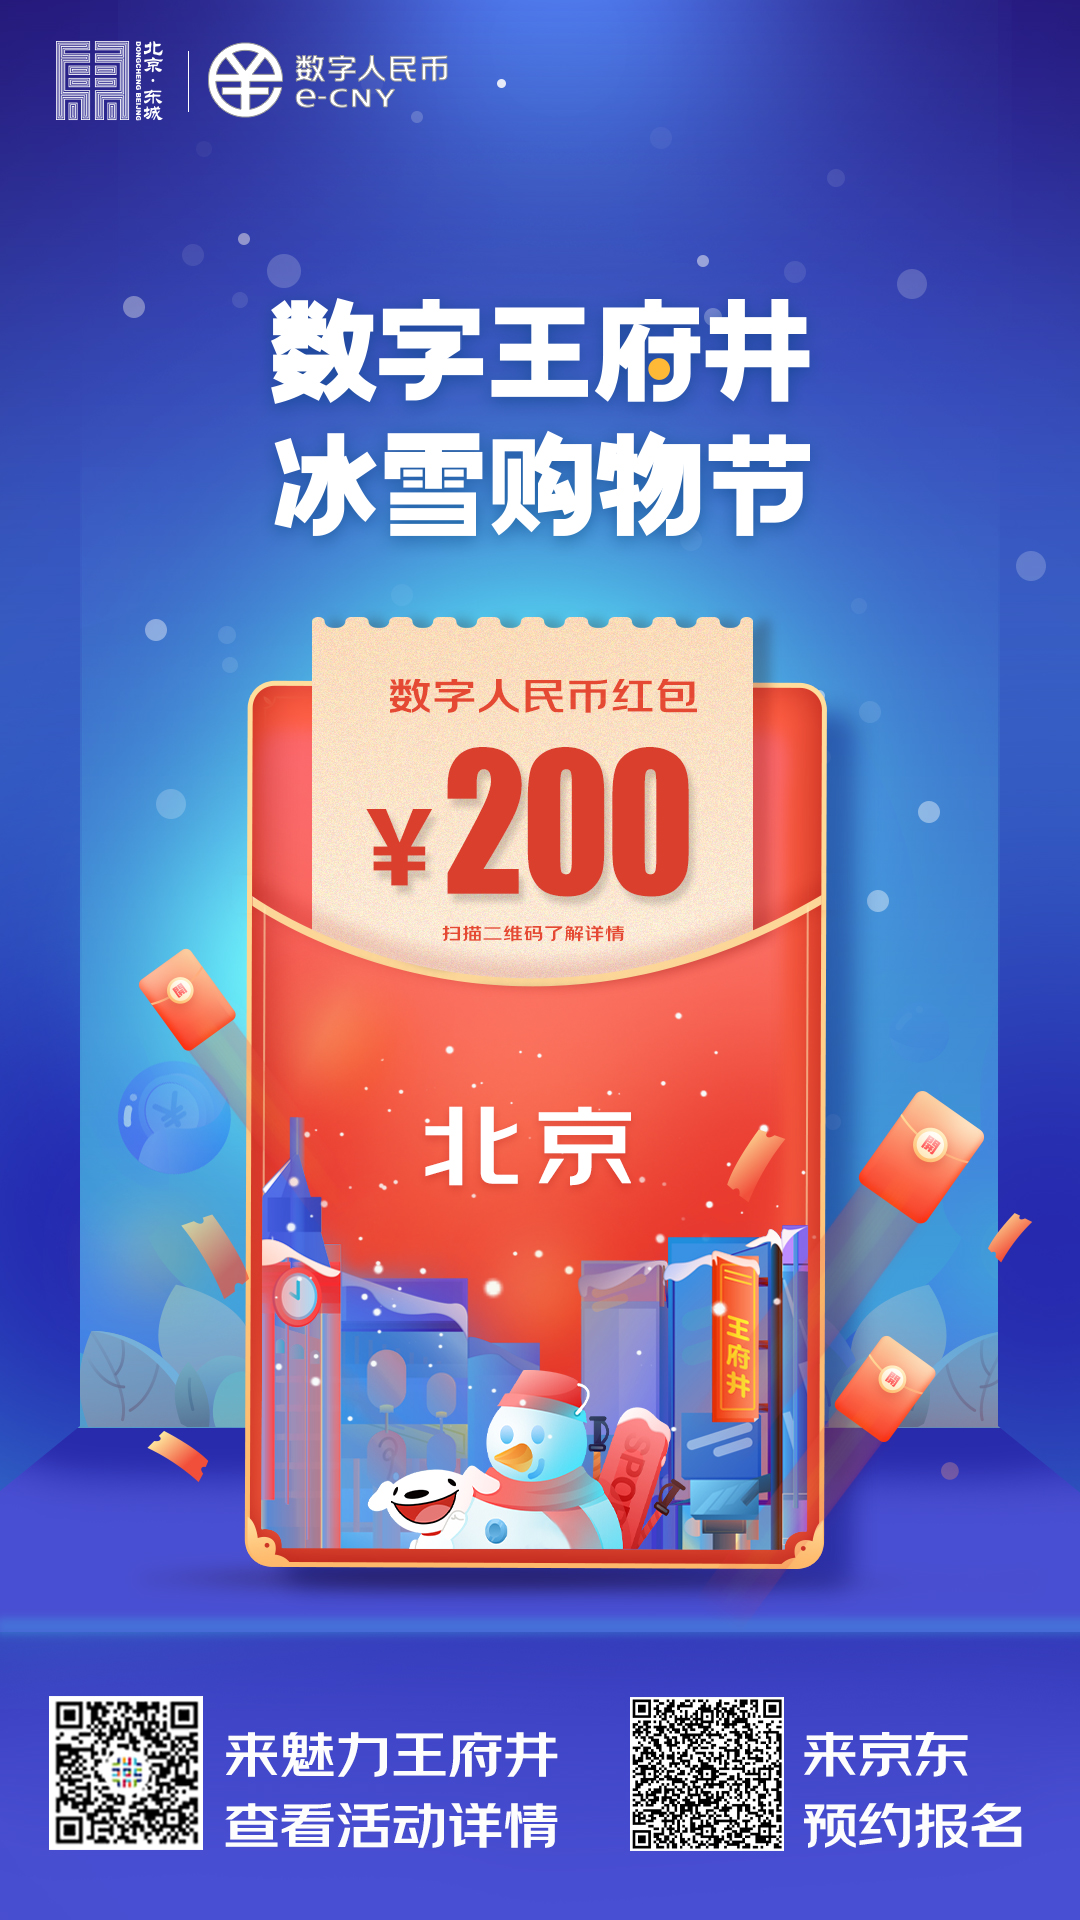 Beijing will send RMB of 50 thousand numbers red bag! Zero hour begins to make an appointment now